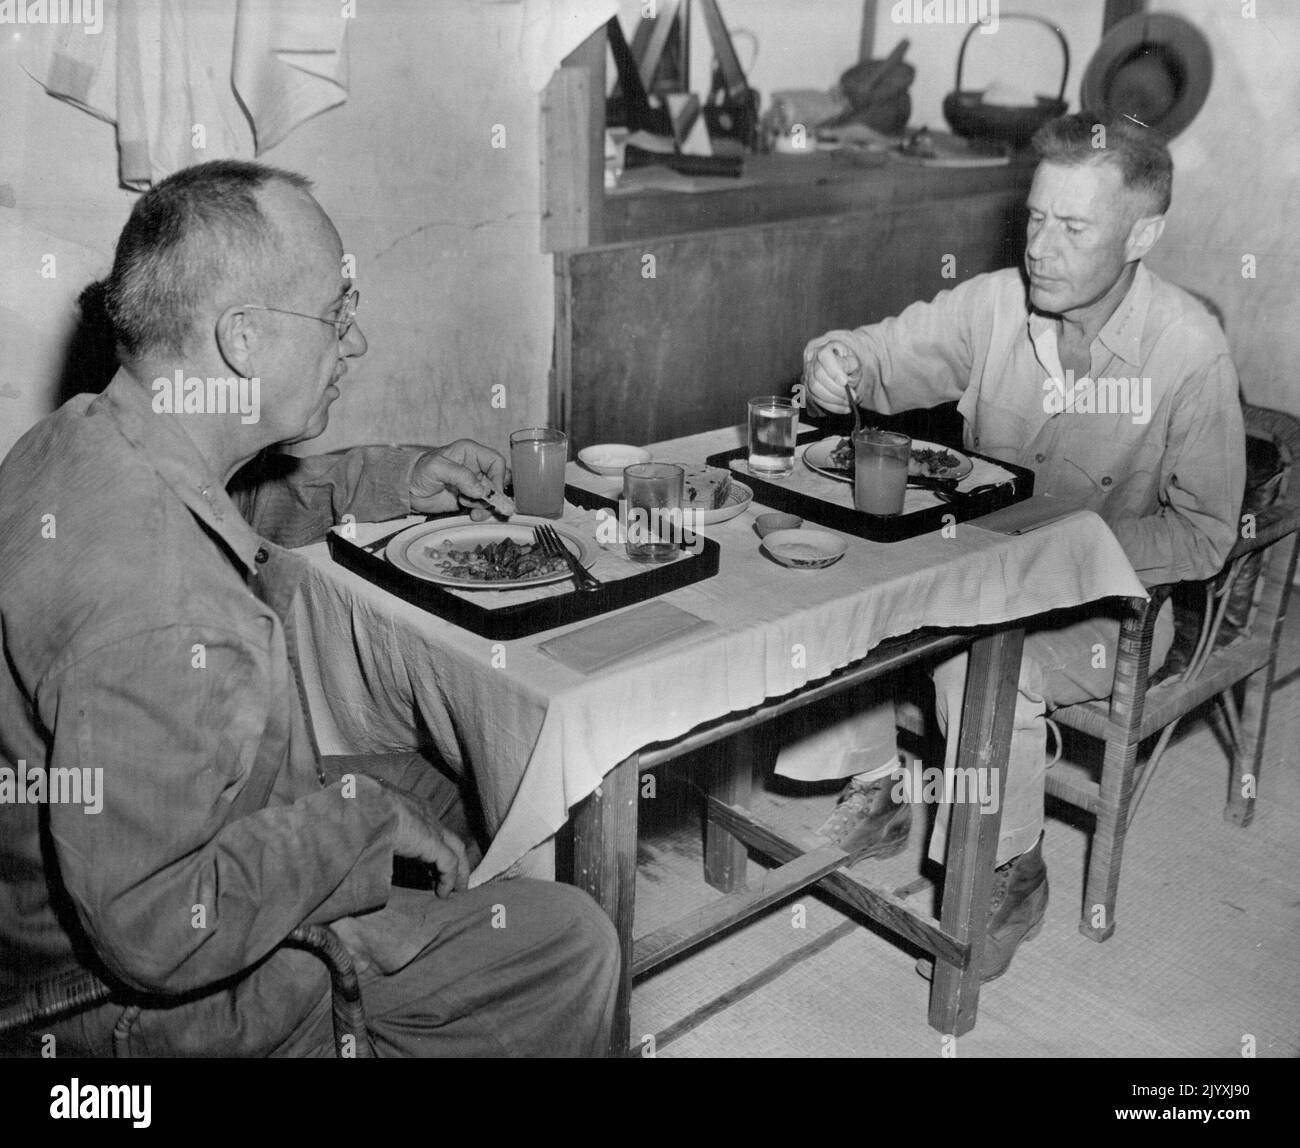 Complete Cleanup - Marine Lieut. Gen. Holland M. Smith (left) Fifth Amphibious Cors commanding general, and Admiral Raymond A. Spruance, USN, commander of the Fifth Fleet, cleanup their luncheon plates at 'chew' in a Japanese home at Charan Kanca, while the cleaning up operations on Saipan were in progress. The Monday meal consisted of canned corned beef, captured from the Japs, and canned American grape fruit juice. The luncheon trays and plates were found in the house. July 13, 1944. (Photo by Officials U.S. Marine Corps Photograph). Stock Photo